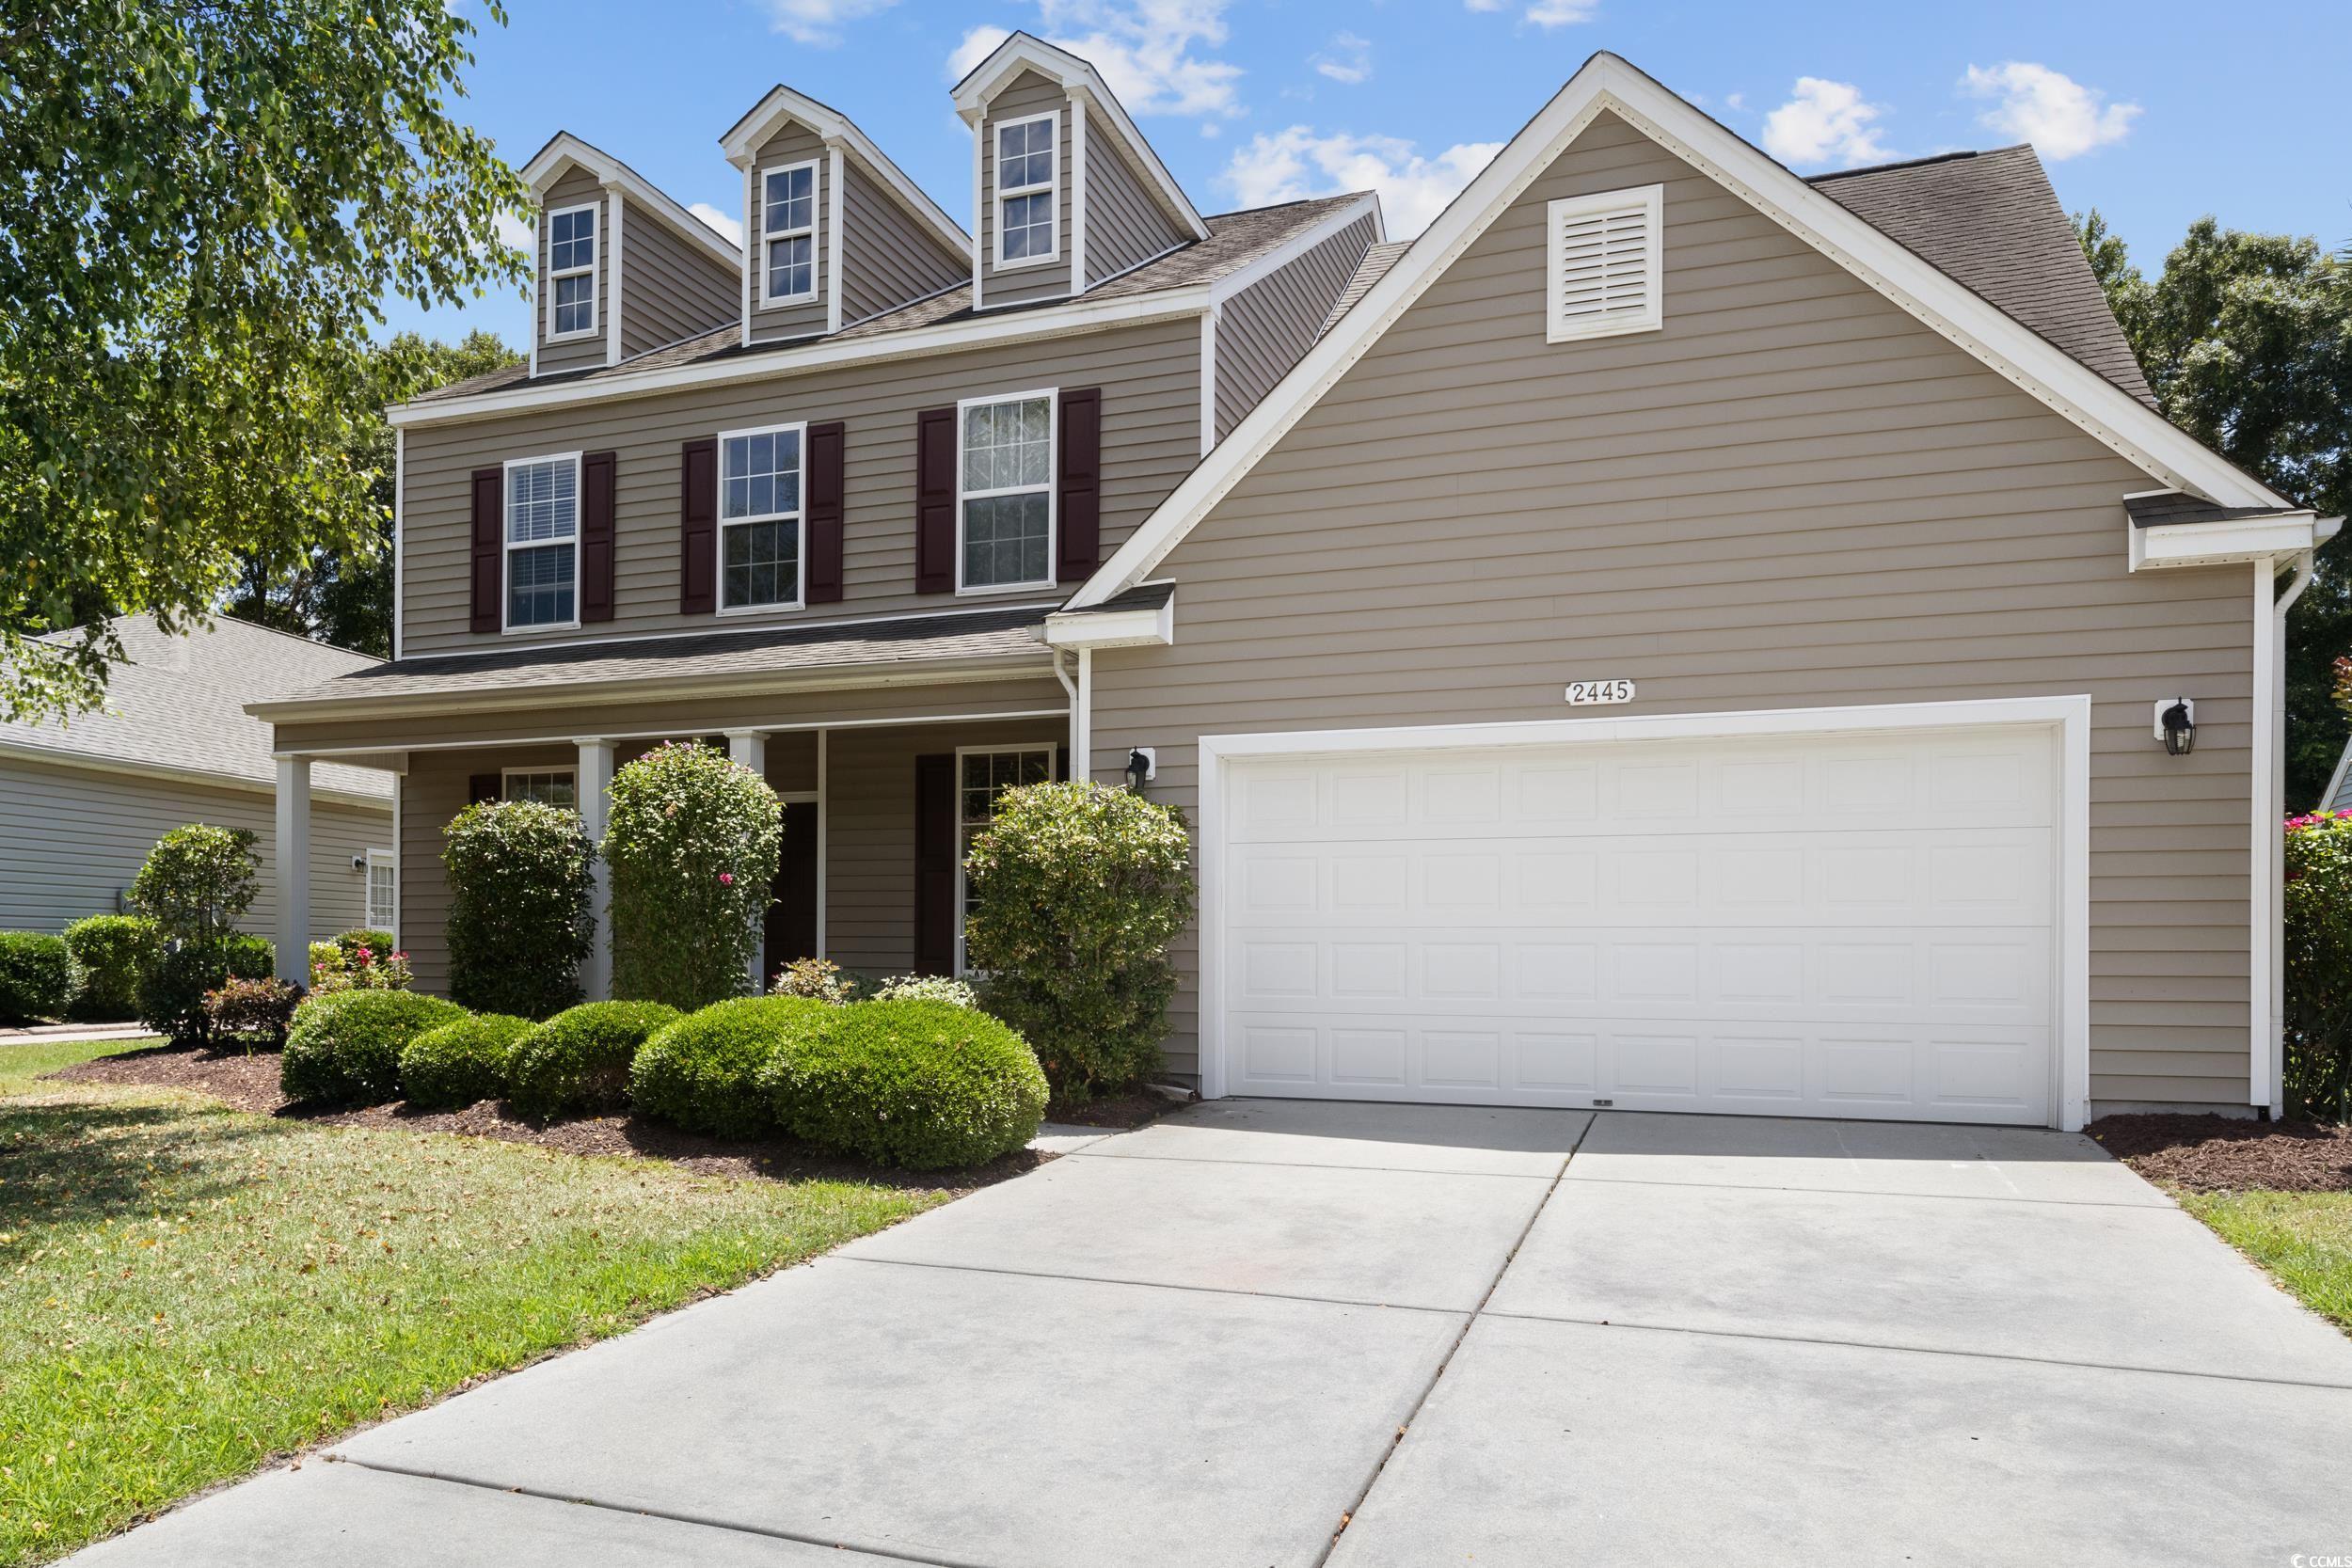 OPEN HOUSE BACK TO BACK SATURDAY 7/27 11:00-2:00 & SUNDAY 7/28 12:00-3:00 NEW ROOF TO BE INSTALLED BY HOMEOWNER Ask your agent about the lender incentive offered for this listing What an amazing find in Carolina Forest's most Popular neighborhood. This 5 bedroom, 2 1/2 bath home is turnkey and ready for a new owner. Home features a formal dining room, large flex area, open floor plan that flows from the kitchen into the great room with vaulted ceilings through the second floor. Eat in kitchen, smoke appliances including washer and dryer.  The Primary bedroom is on the first floor and features a garden tub, shower, double vanity, and a walk-in closet.  Upstairs has 4 bedrooms with a full bath.  The outside is located on a quiet street with an attached 2 car garage and room for two additional vehicles in the driveway. The rear of the home is white picket fenced with an enclosed patio with the EZ Breeze system.  Large, poured concrete patio that is perfect for a fire pit, barbeque, family gathering. The backyard is large and has lots of room for children or pets to have a safe protected space.  This neighborhood features two amenity centers that offer pools, children's playground, gym, basketball courts, and sidewalks throughout the community. Make your appointment today.